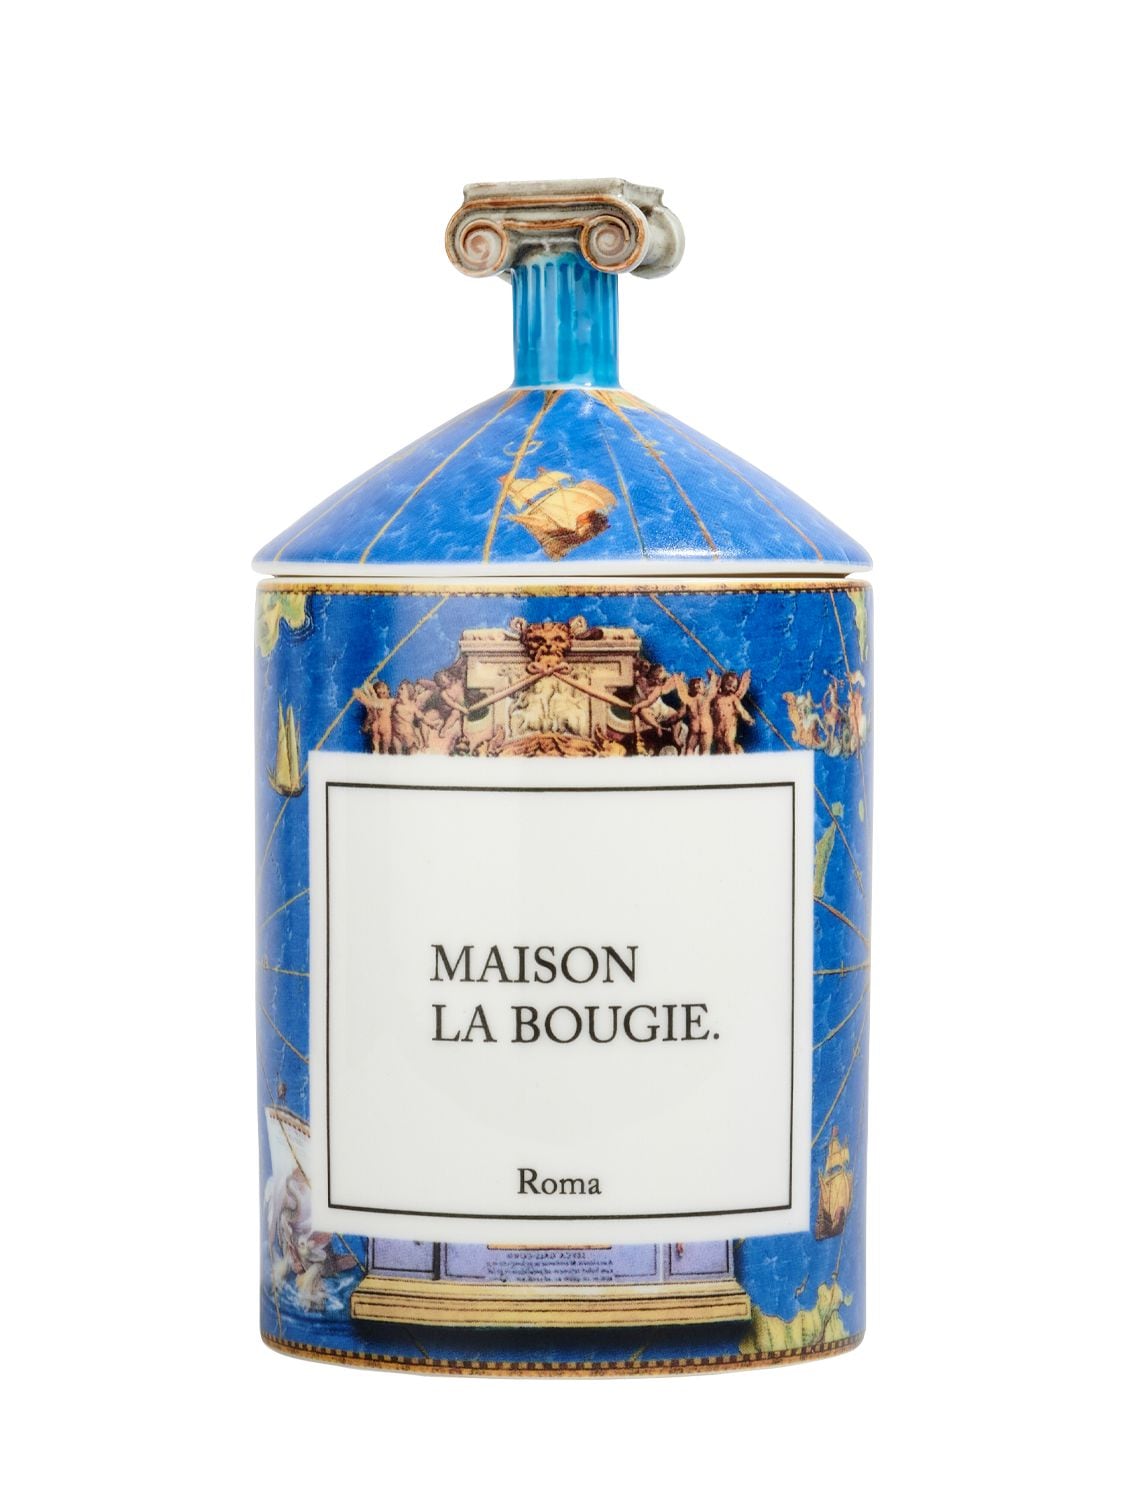 Maison La Bougie 350gr Roma Scented Candle In Blue